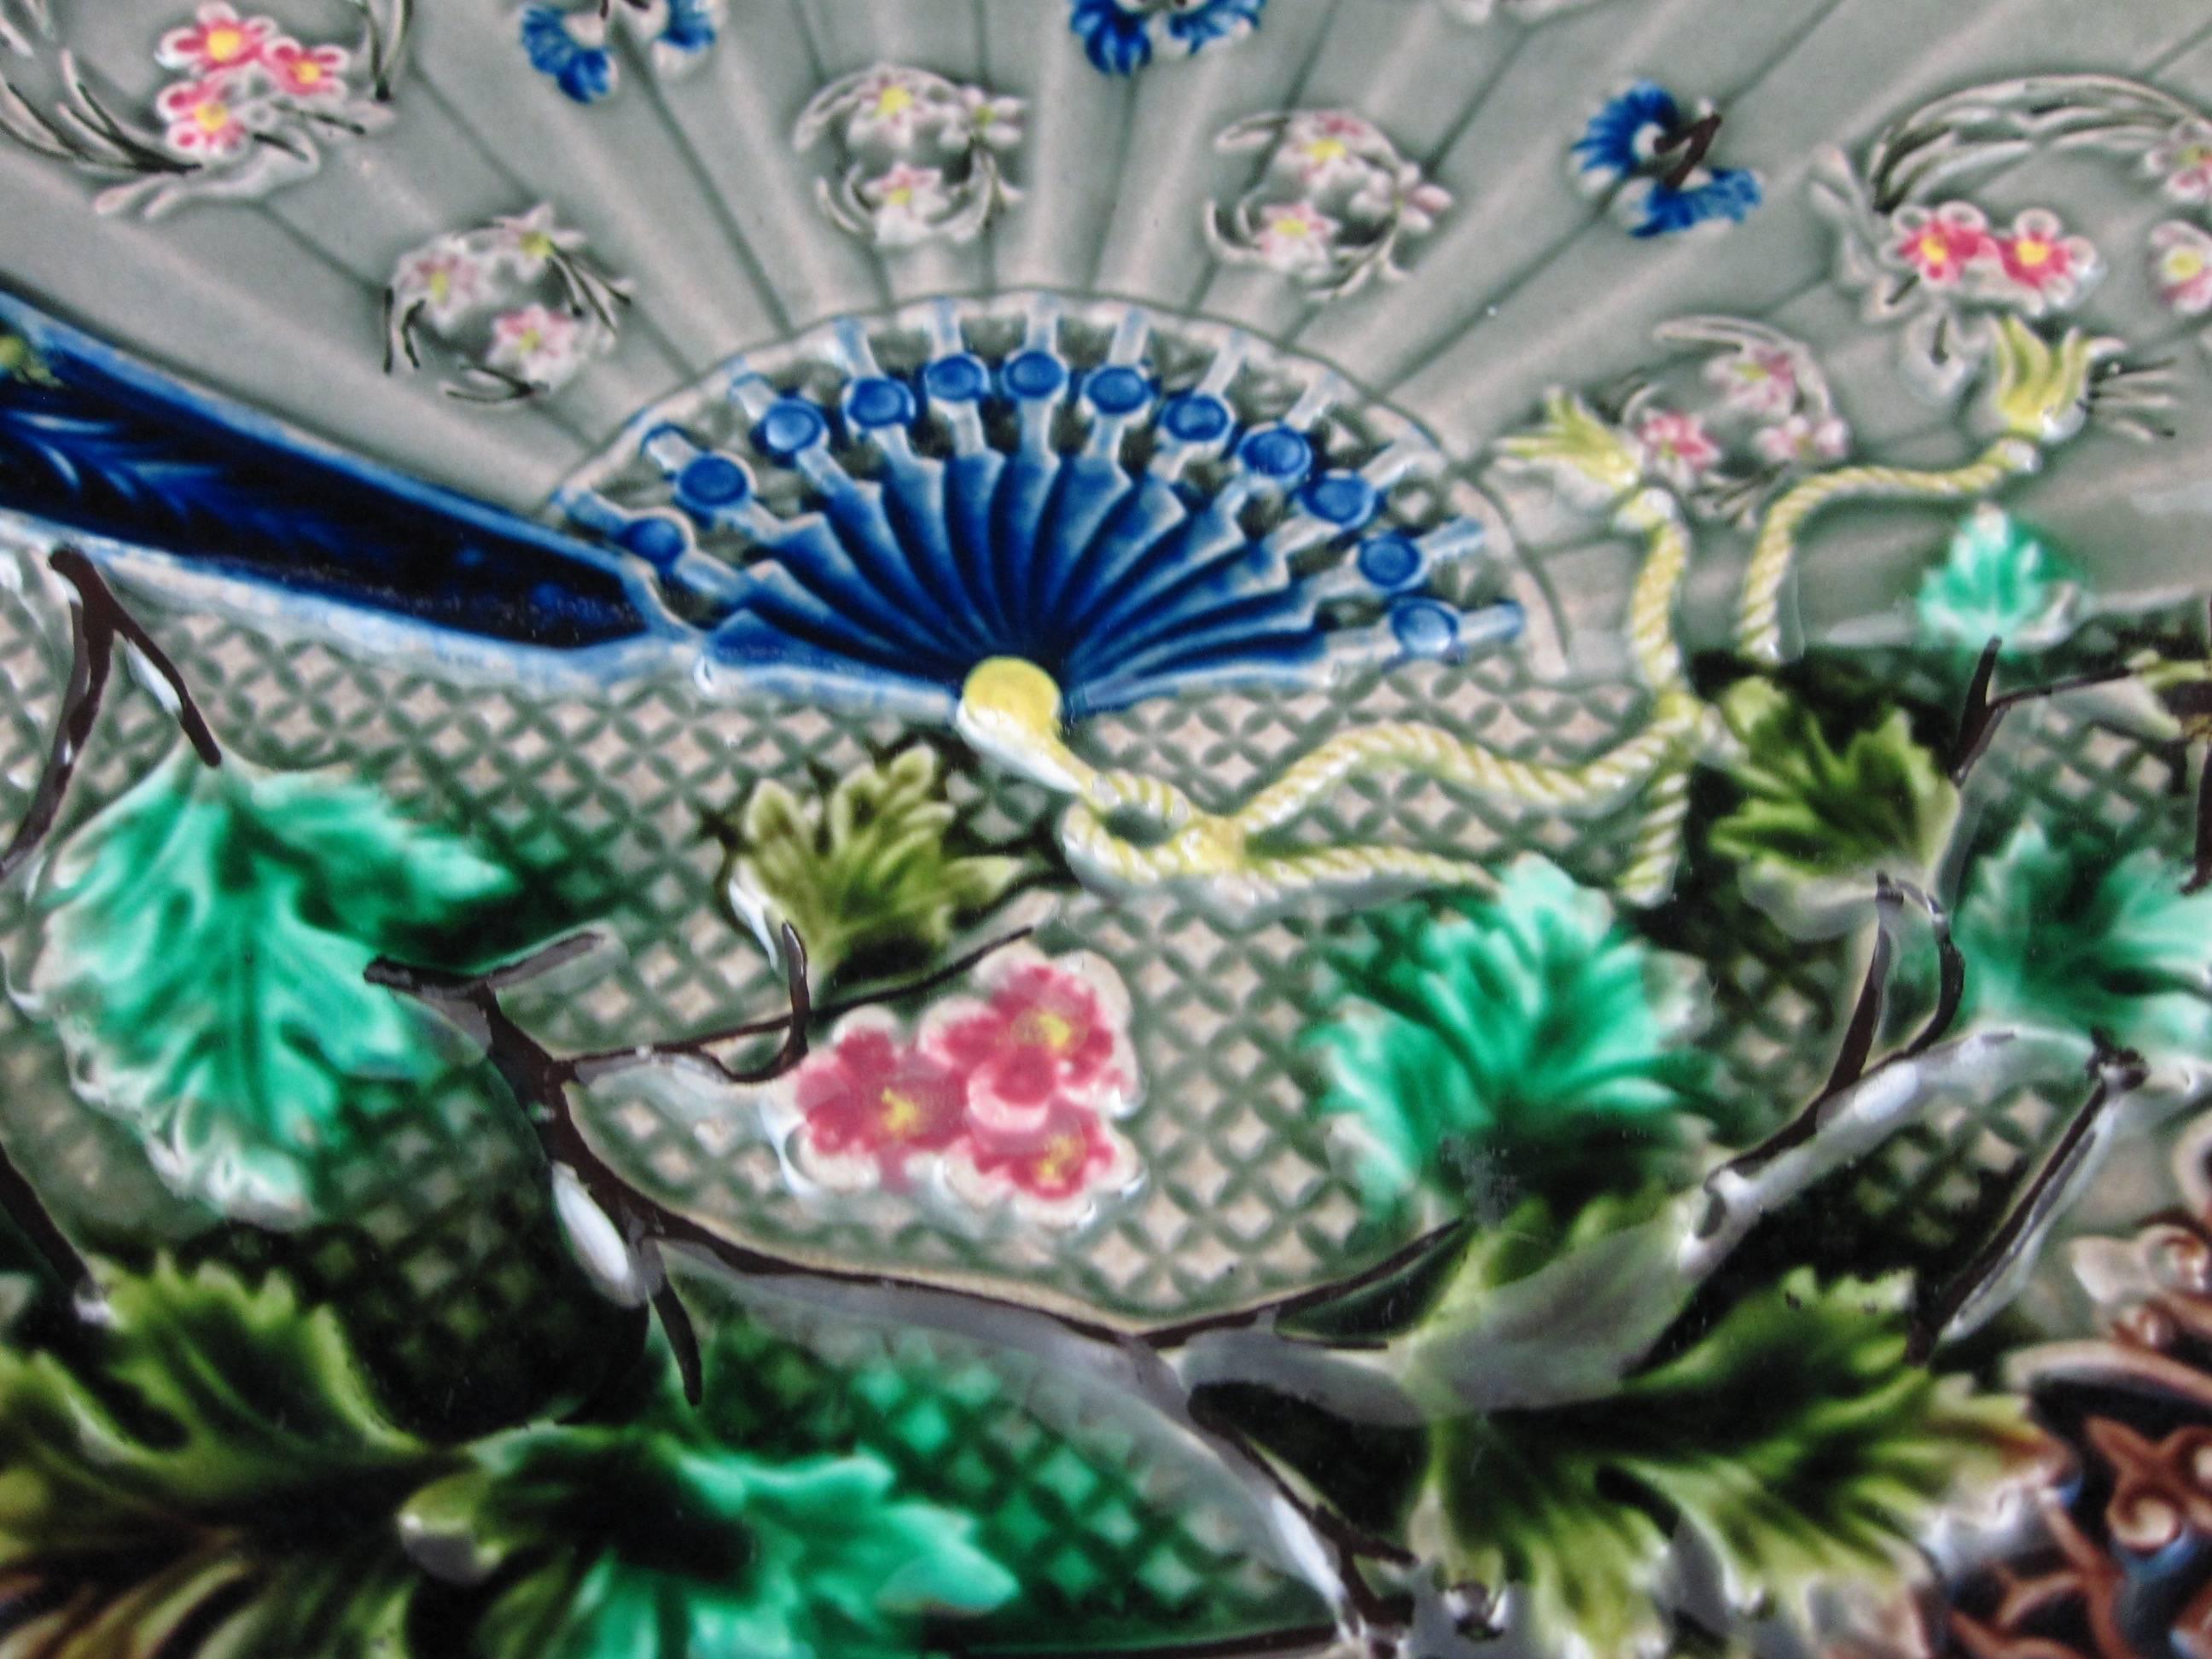 A 19th century, Art Nouveau, Japonisme Majolica pottery wall or cabinet plate. Manufactured by Villeroy & Boch, Germany, circa 1900, in an intricate fan and floral pattern with deep rich color.

A rarer example, this Asian influenced mold shows a